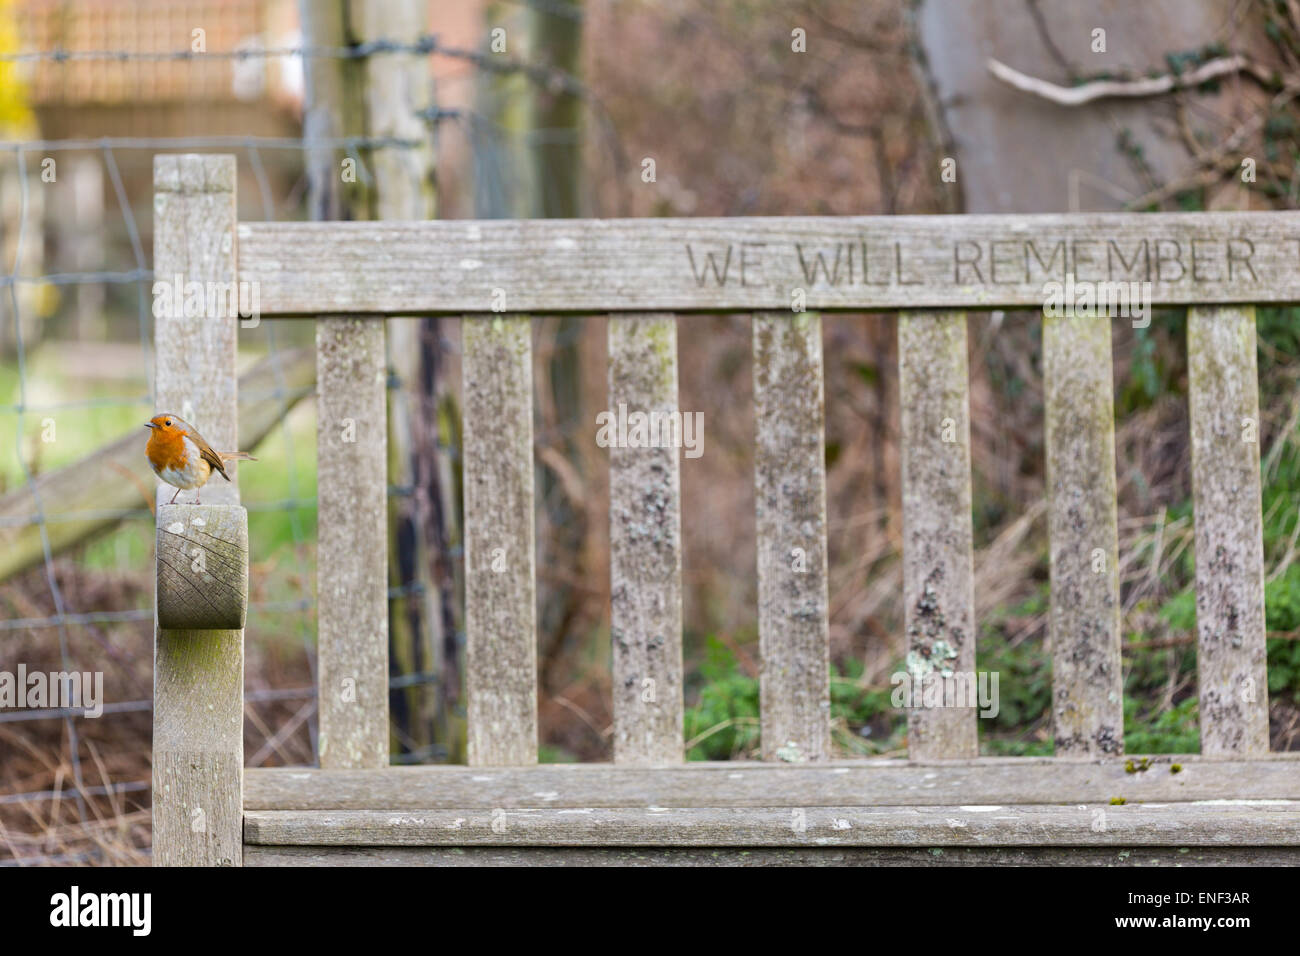 A Robin on a bench watching the photographer... Stock Photo